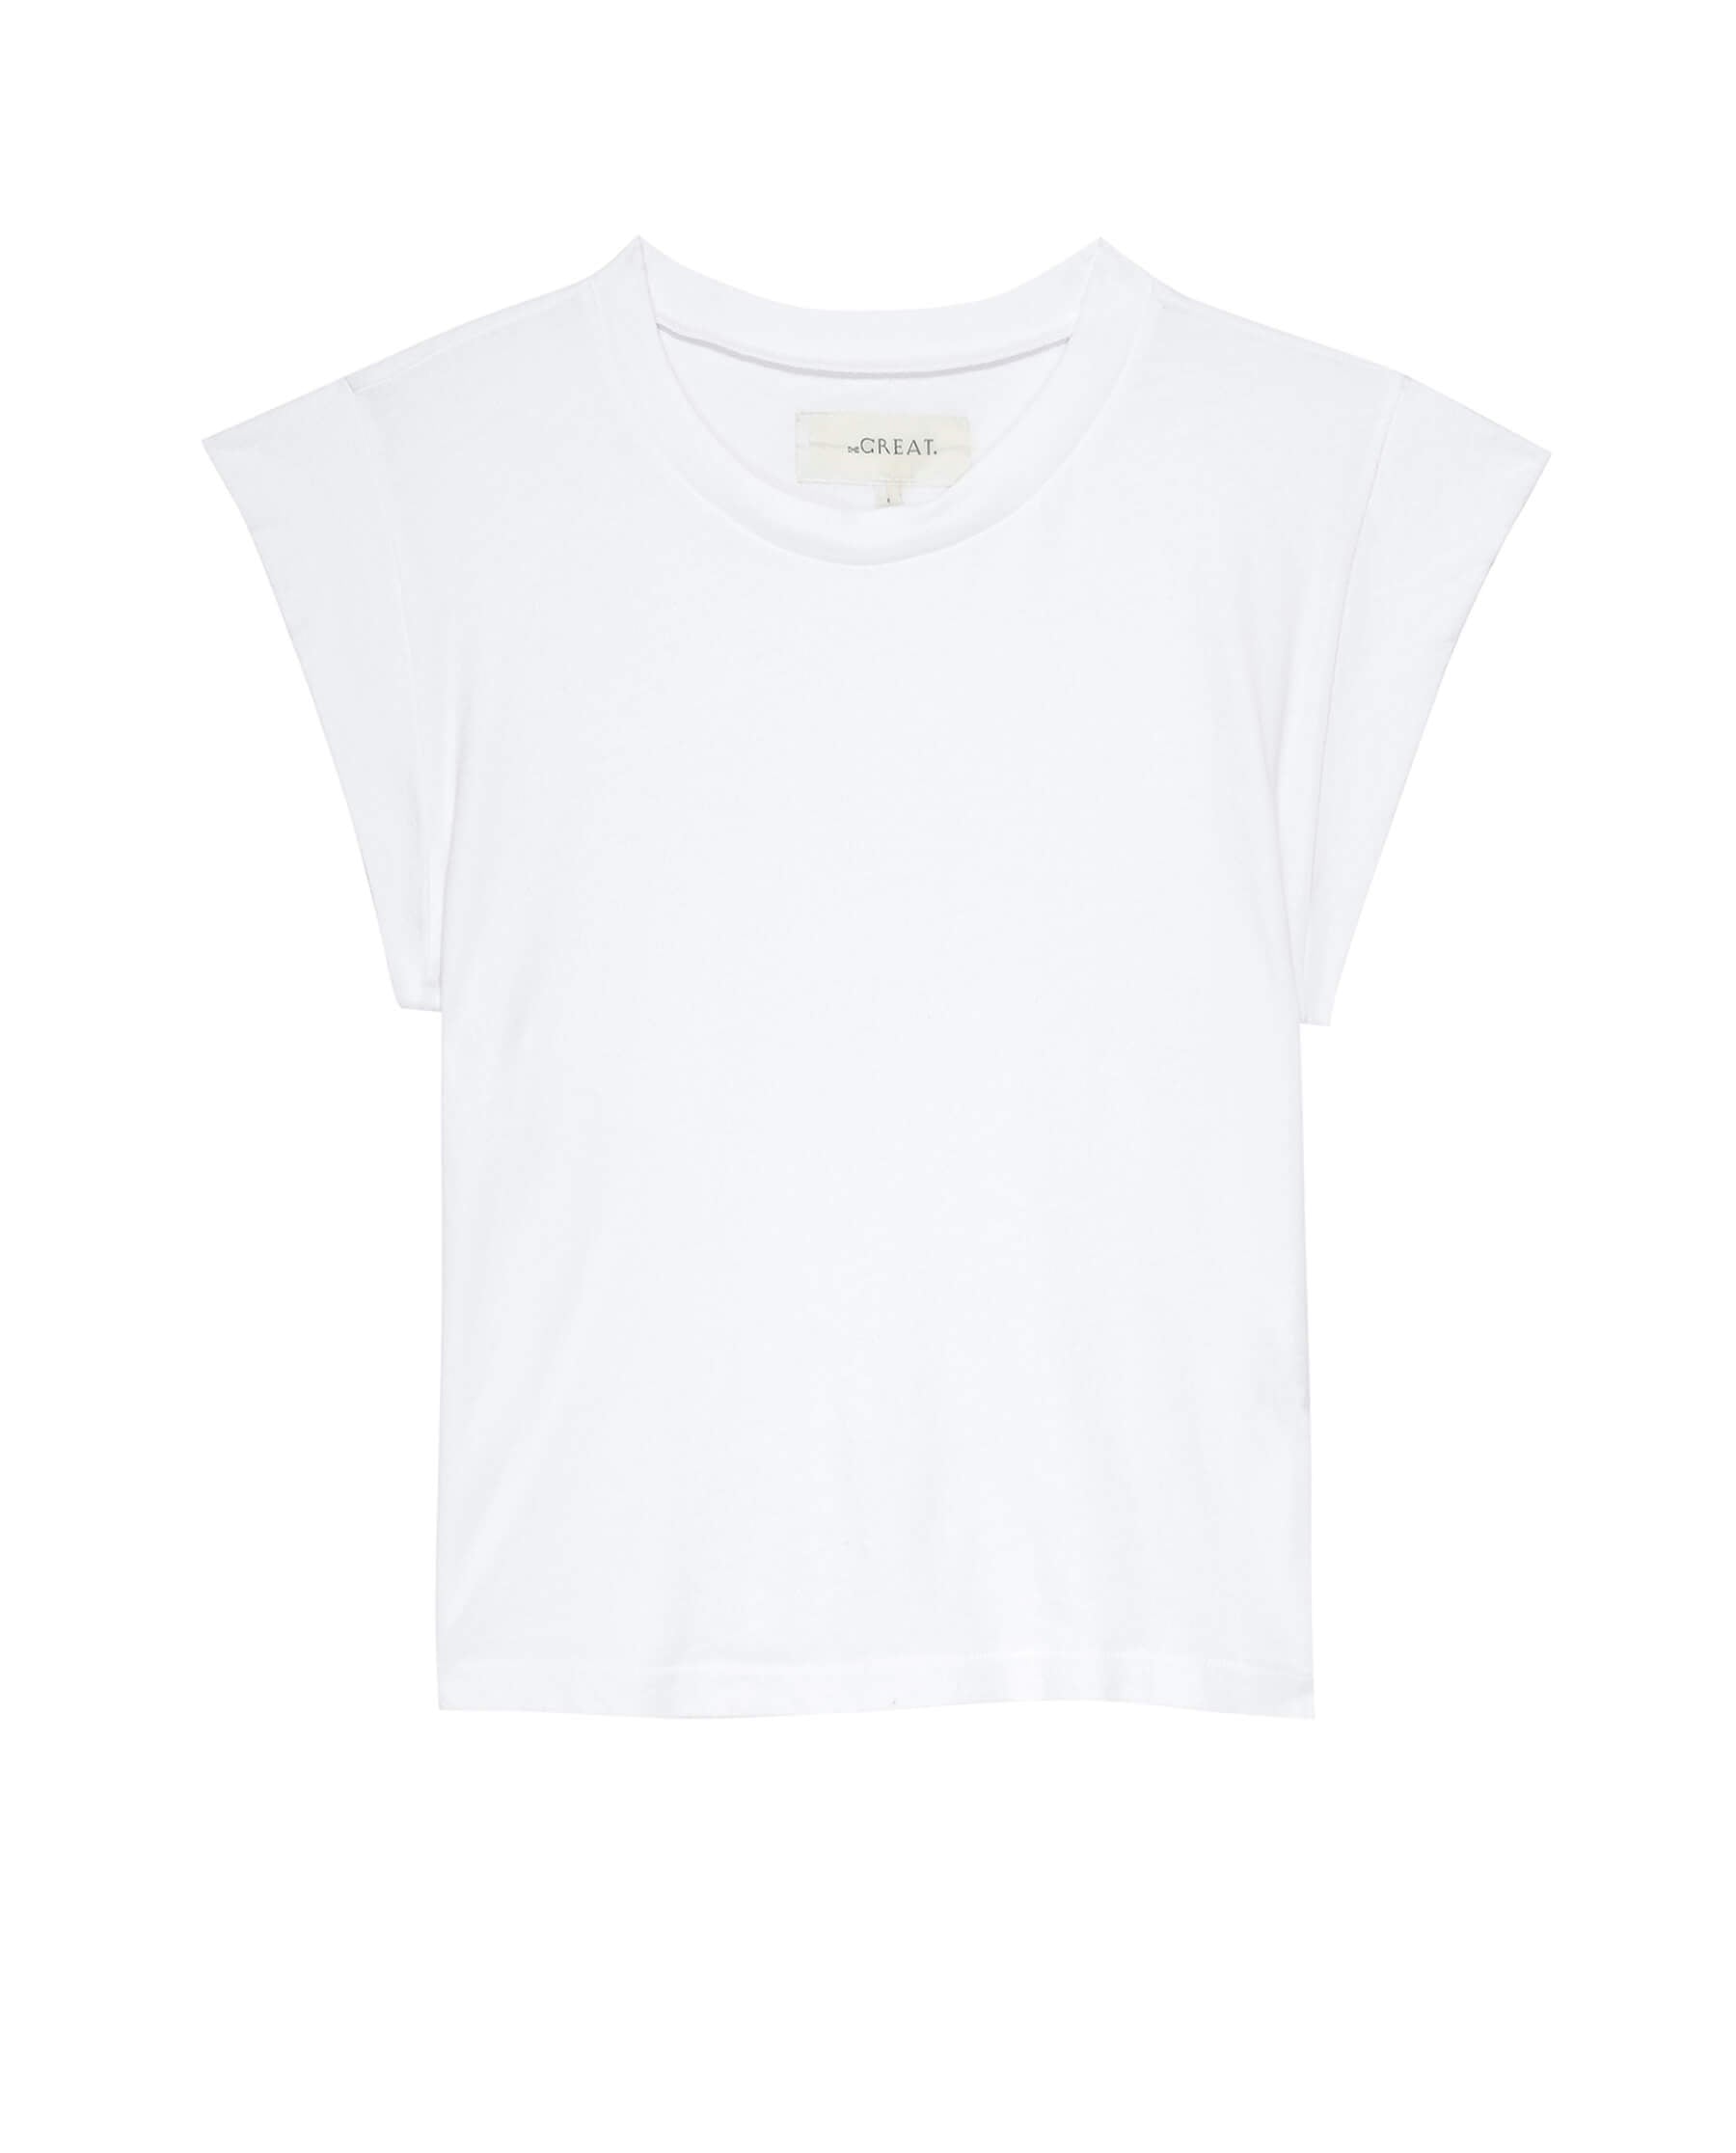 The Peak Shoulder Tee. -- True White TEES THE GREAT. FALL 22 KNITS